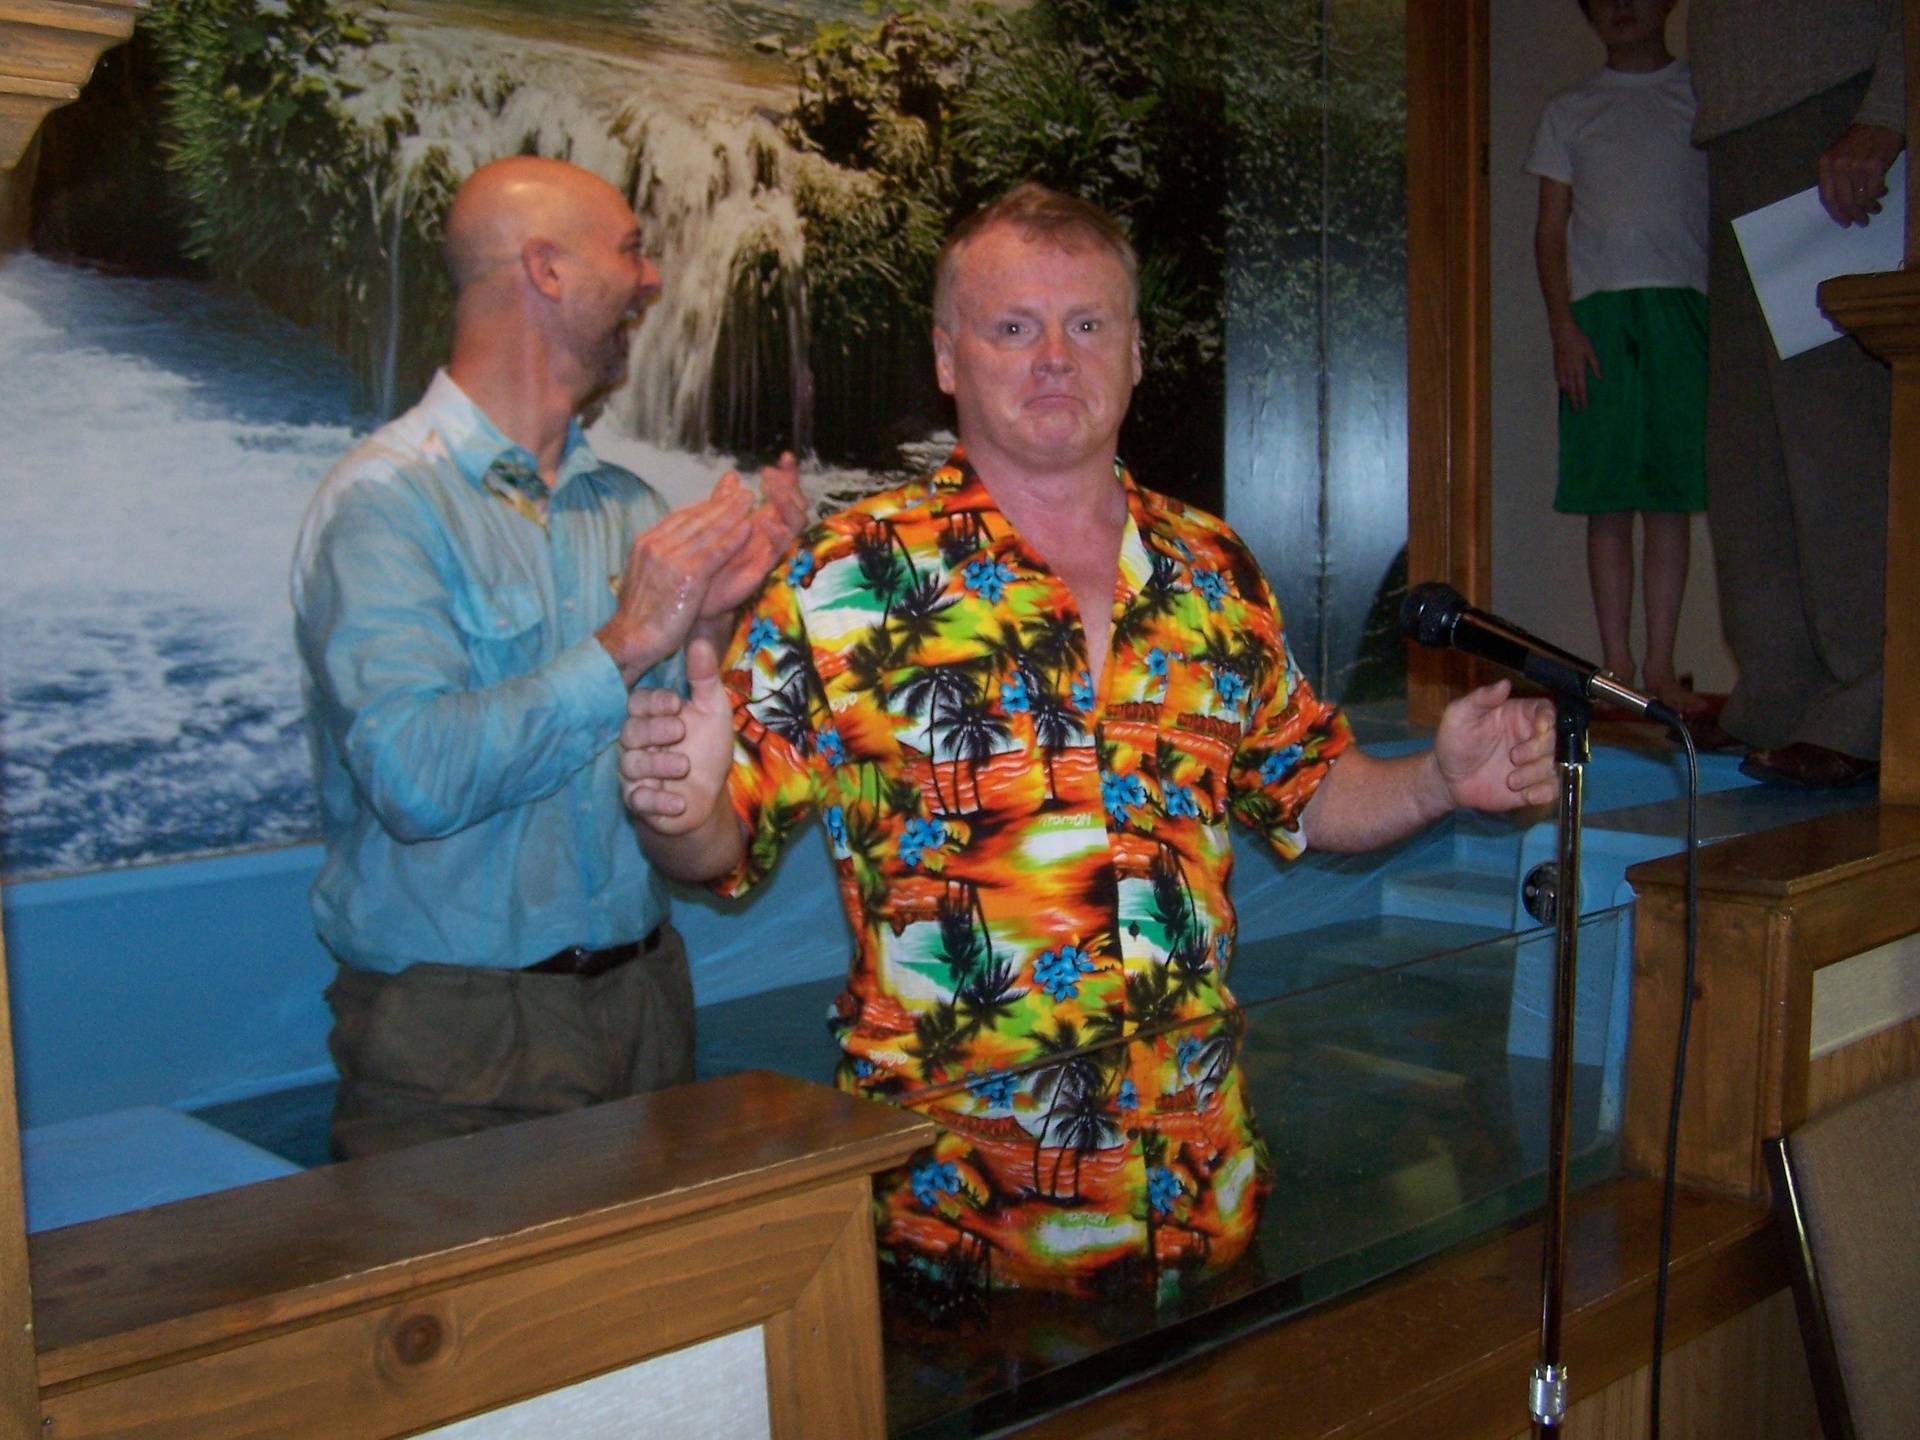 11/22/15 Bob Scharf celebrating his life in Christ and baptism